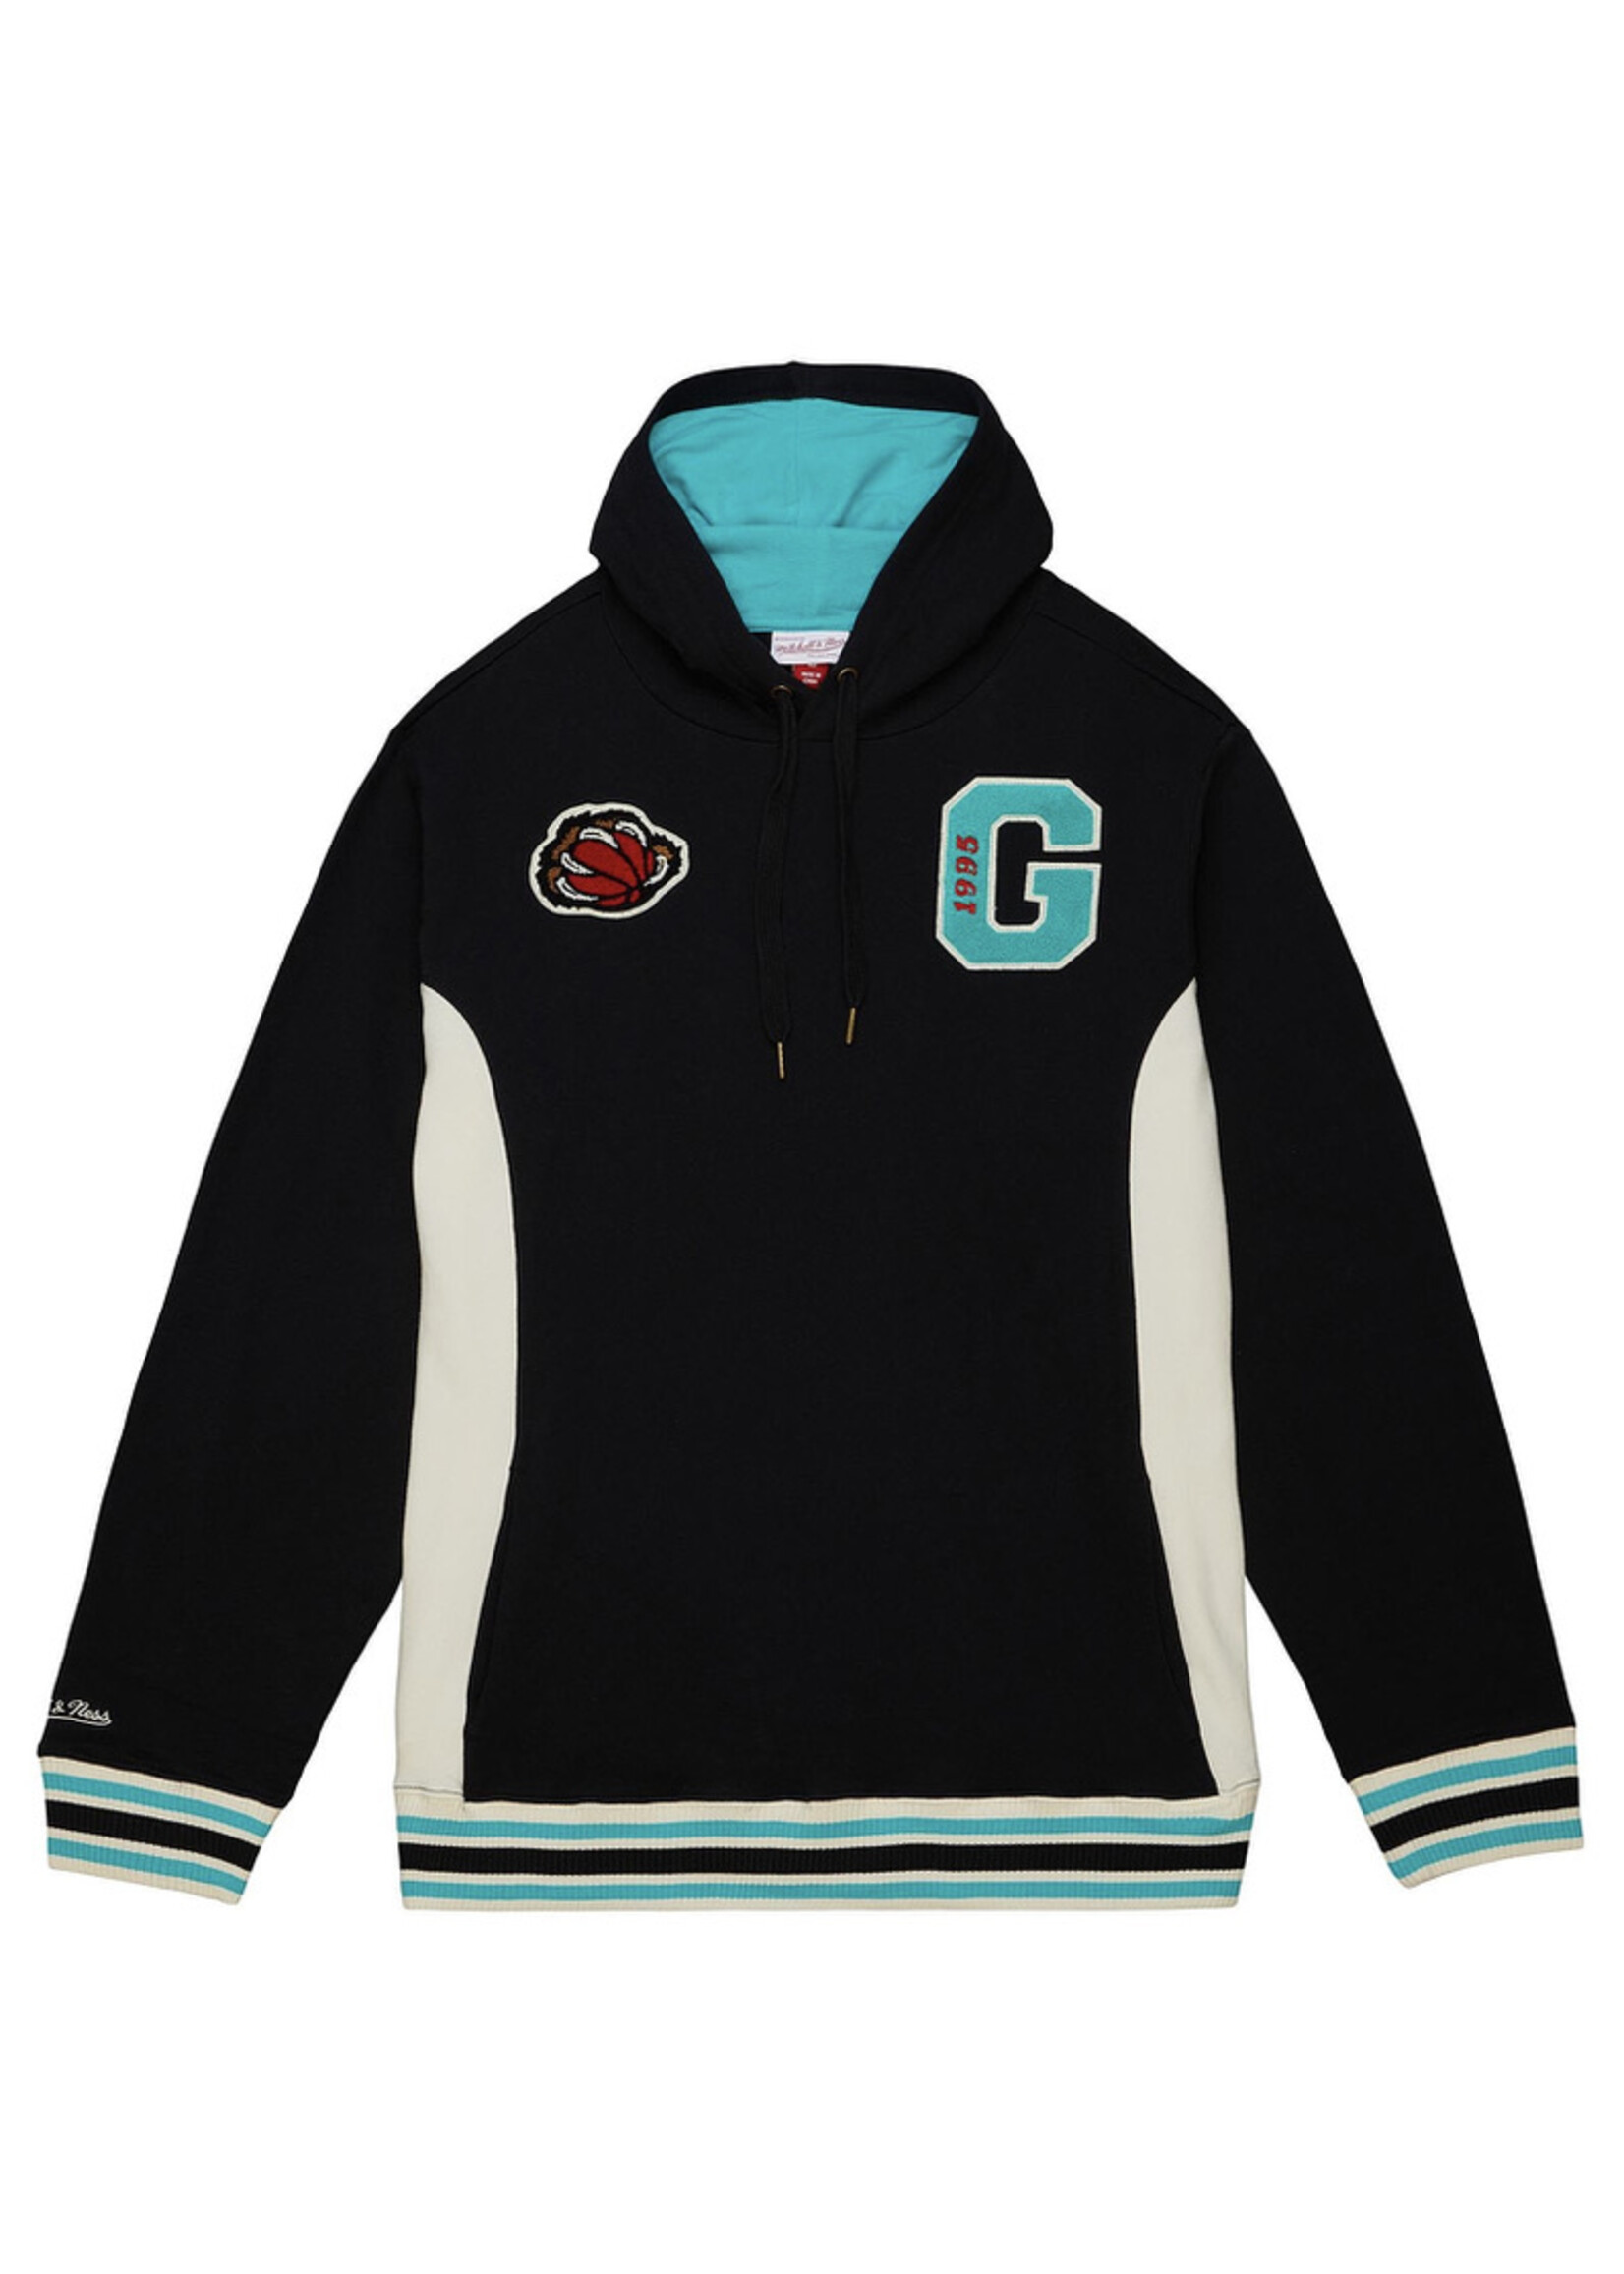 Mitchell & Ness Vancouver Grizzlies French Terry Hoody